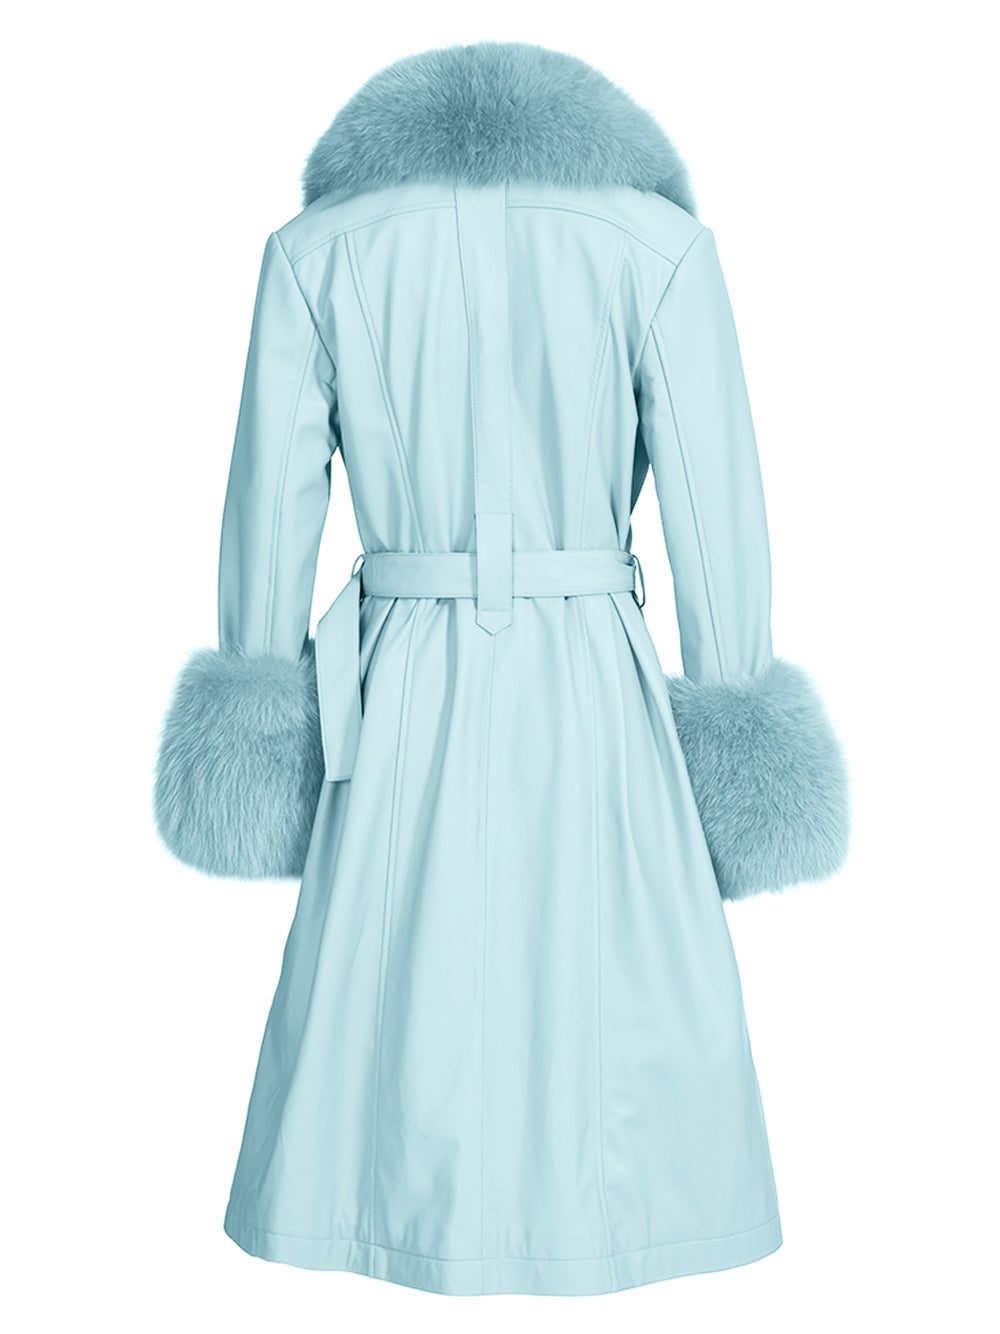 Faux Fur Genuine Leather Coat in Baby Blue